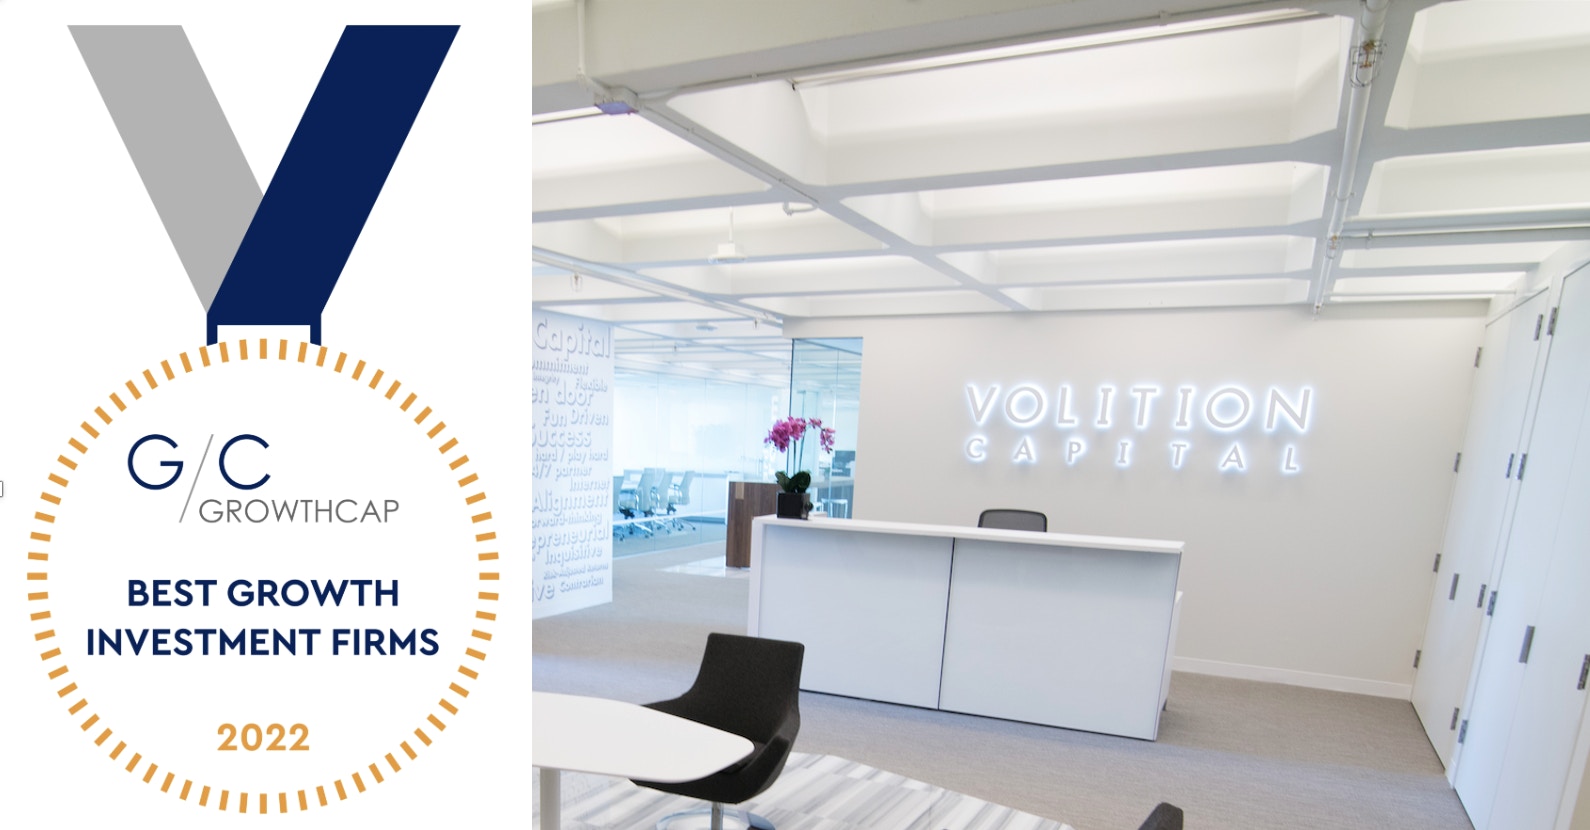 Volition Capital Selected For Best Growth Investment Firm Award